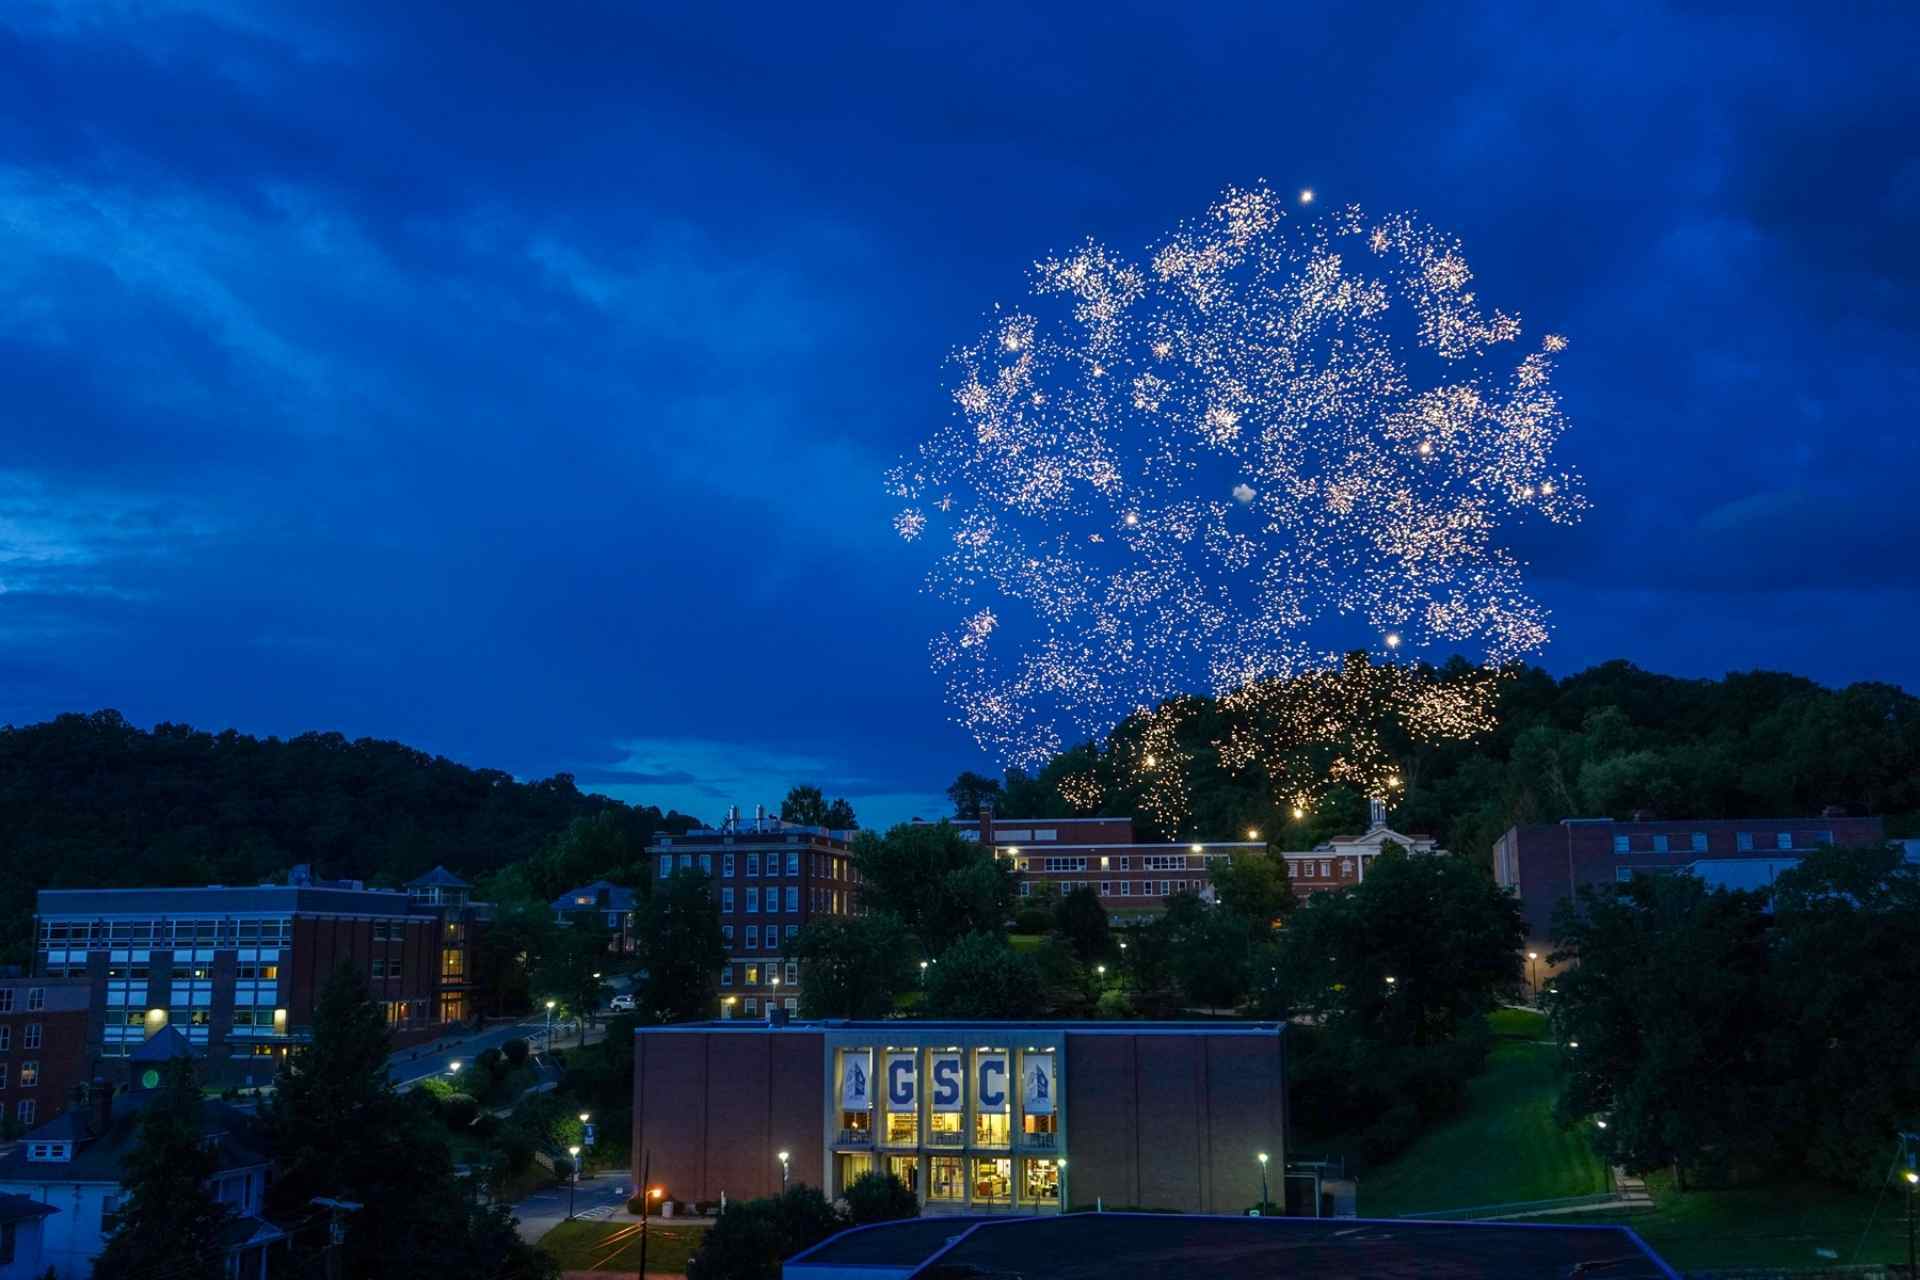 Fireworks light the sky over Glenville State College’s campus. The institution will celebrate its 150th anniversary on Saturday, February 19, 2022.